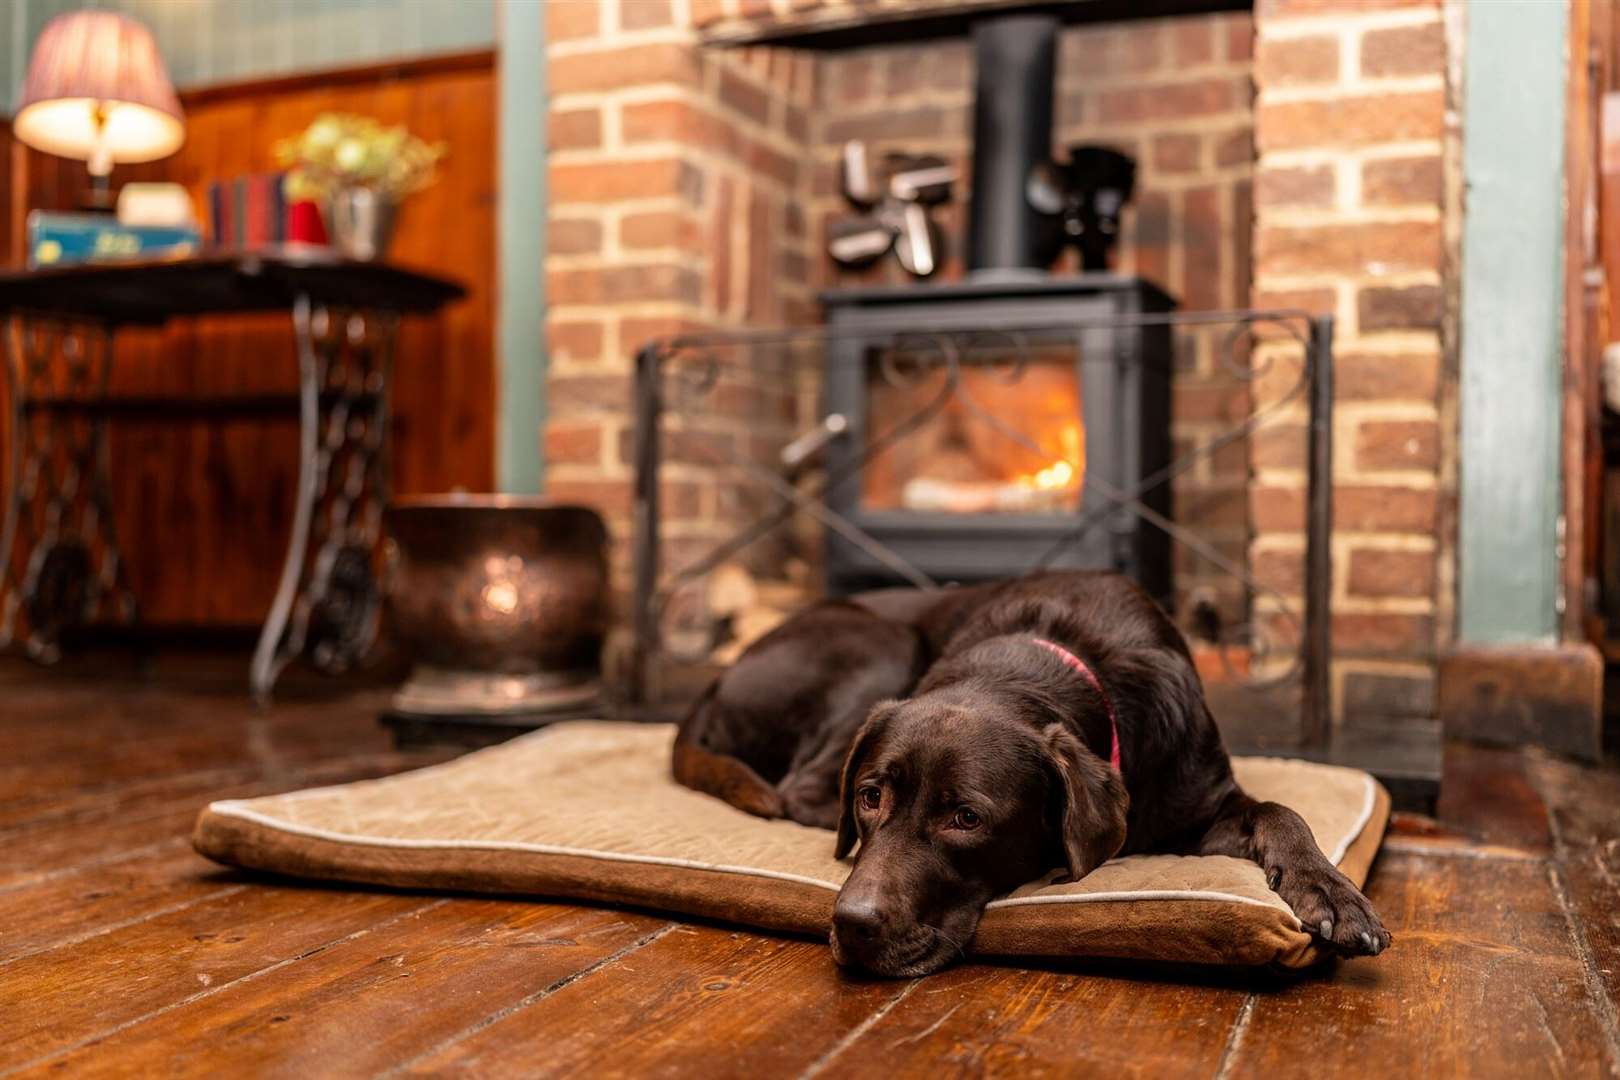 The Anchor, Faversham, will also have a resident dog - labrador Bluebell. Pic: Shepherd Neame